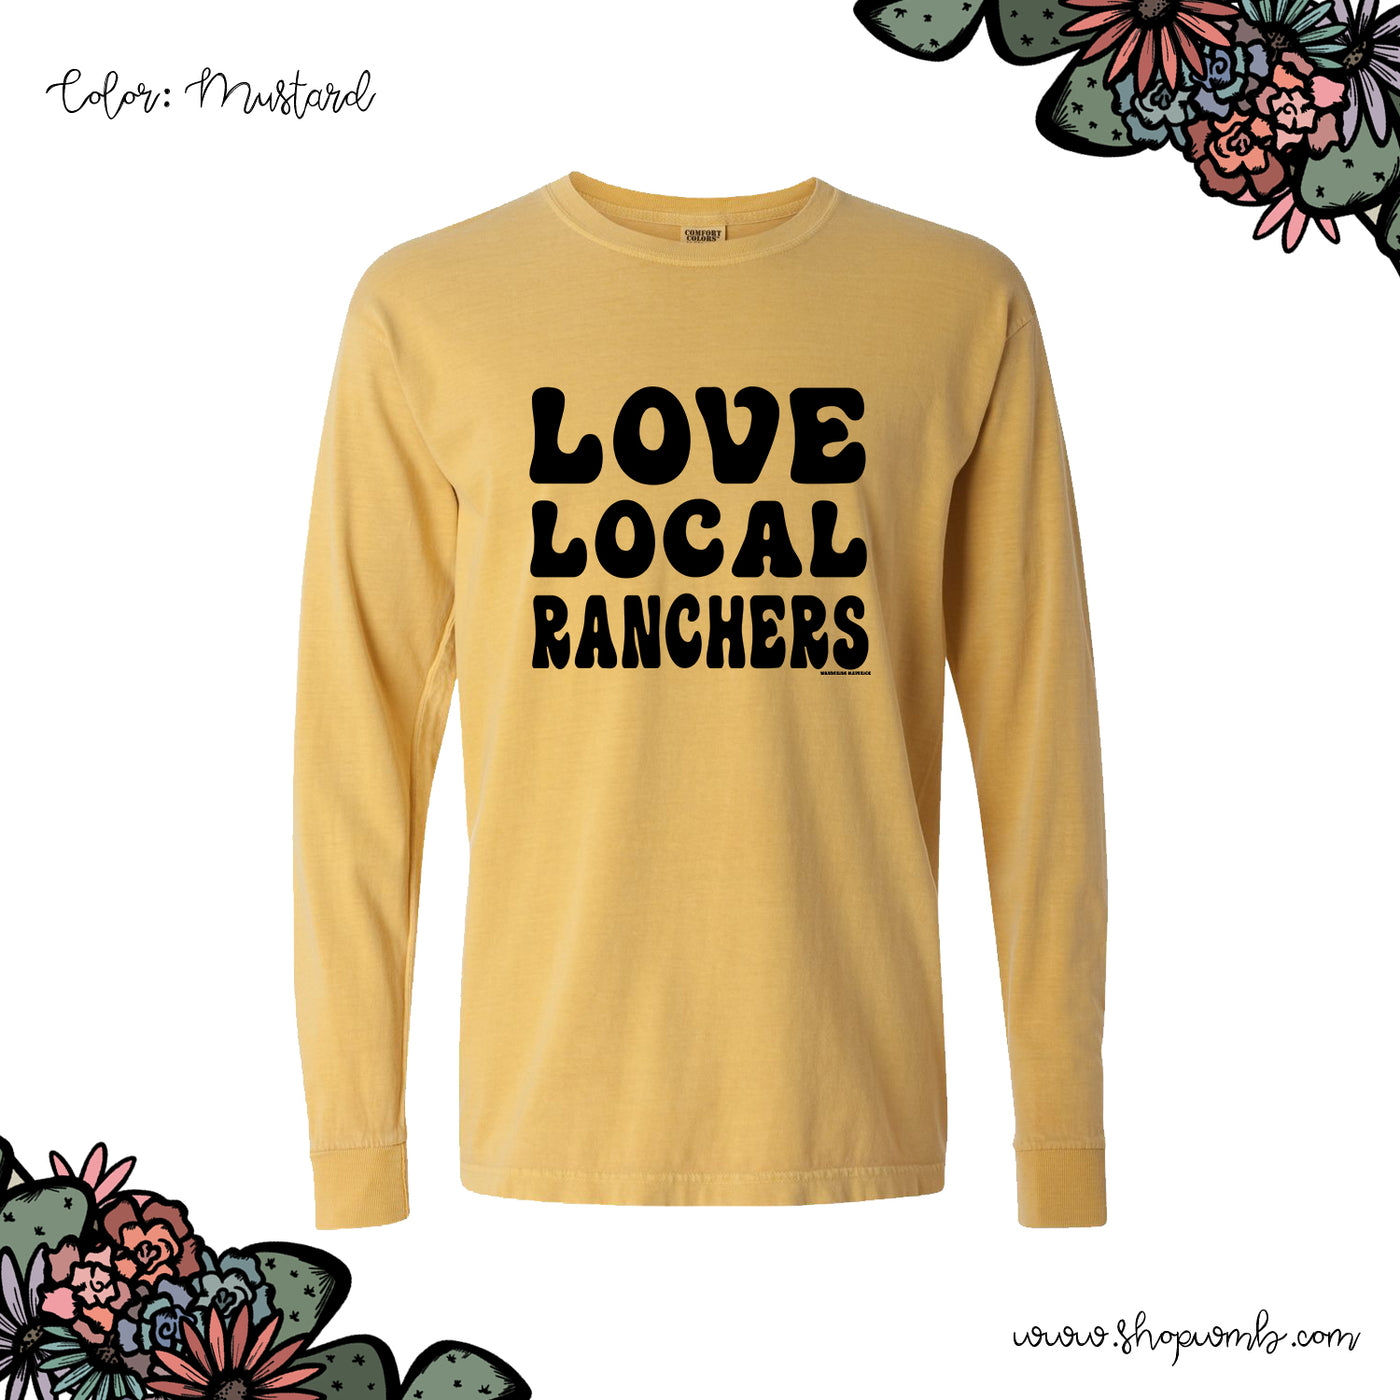 LOVE LOCAL RANCHERS BLACK INK LONG SLEEVE T-Shirt (S-3XL) - Multiple Colors!